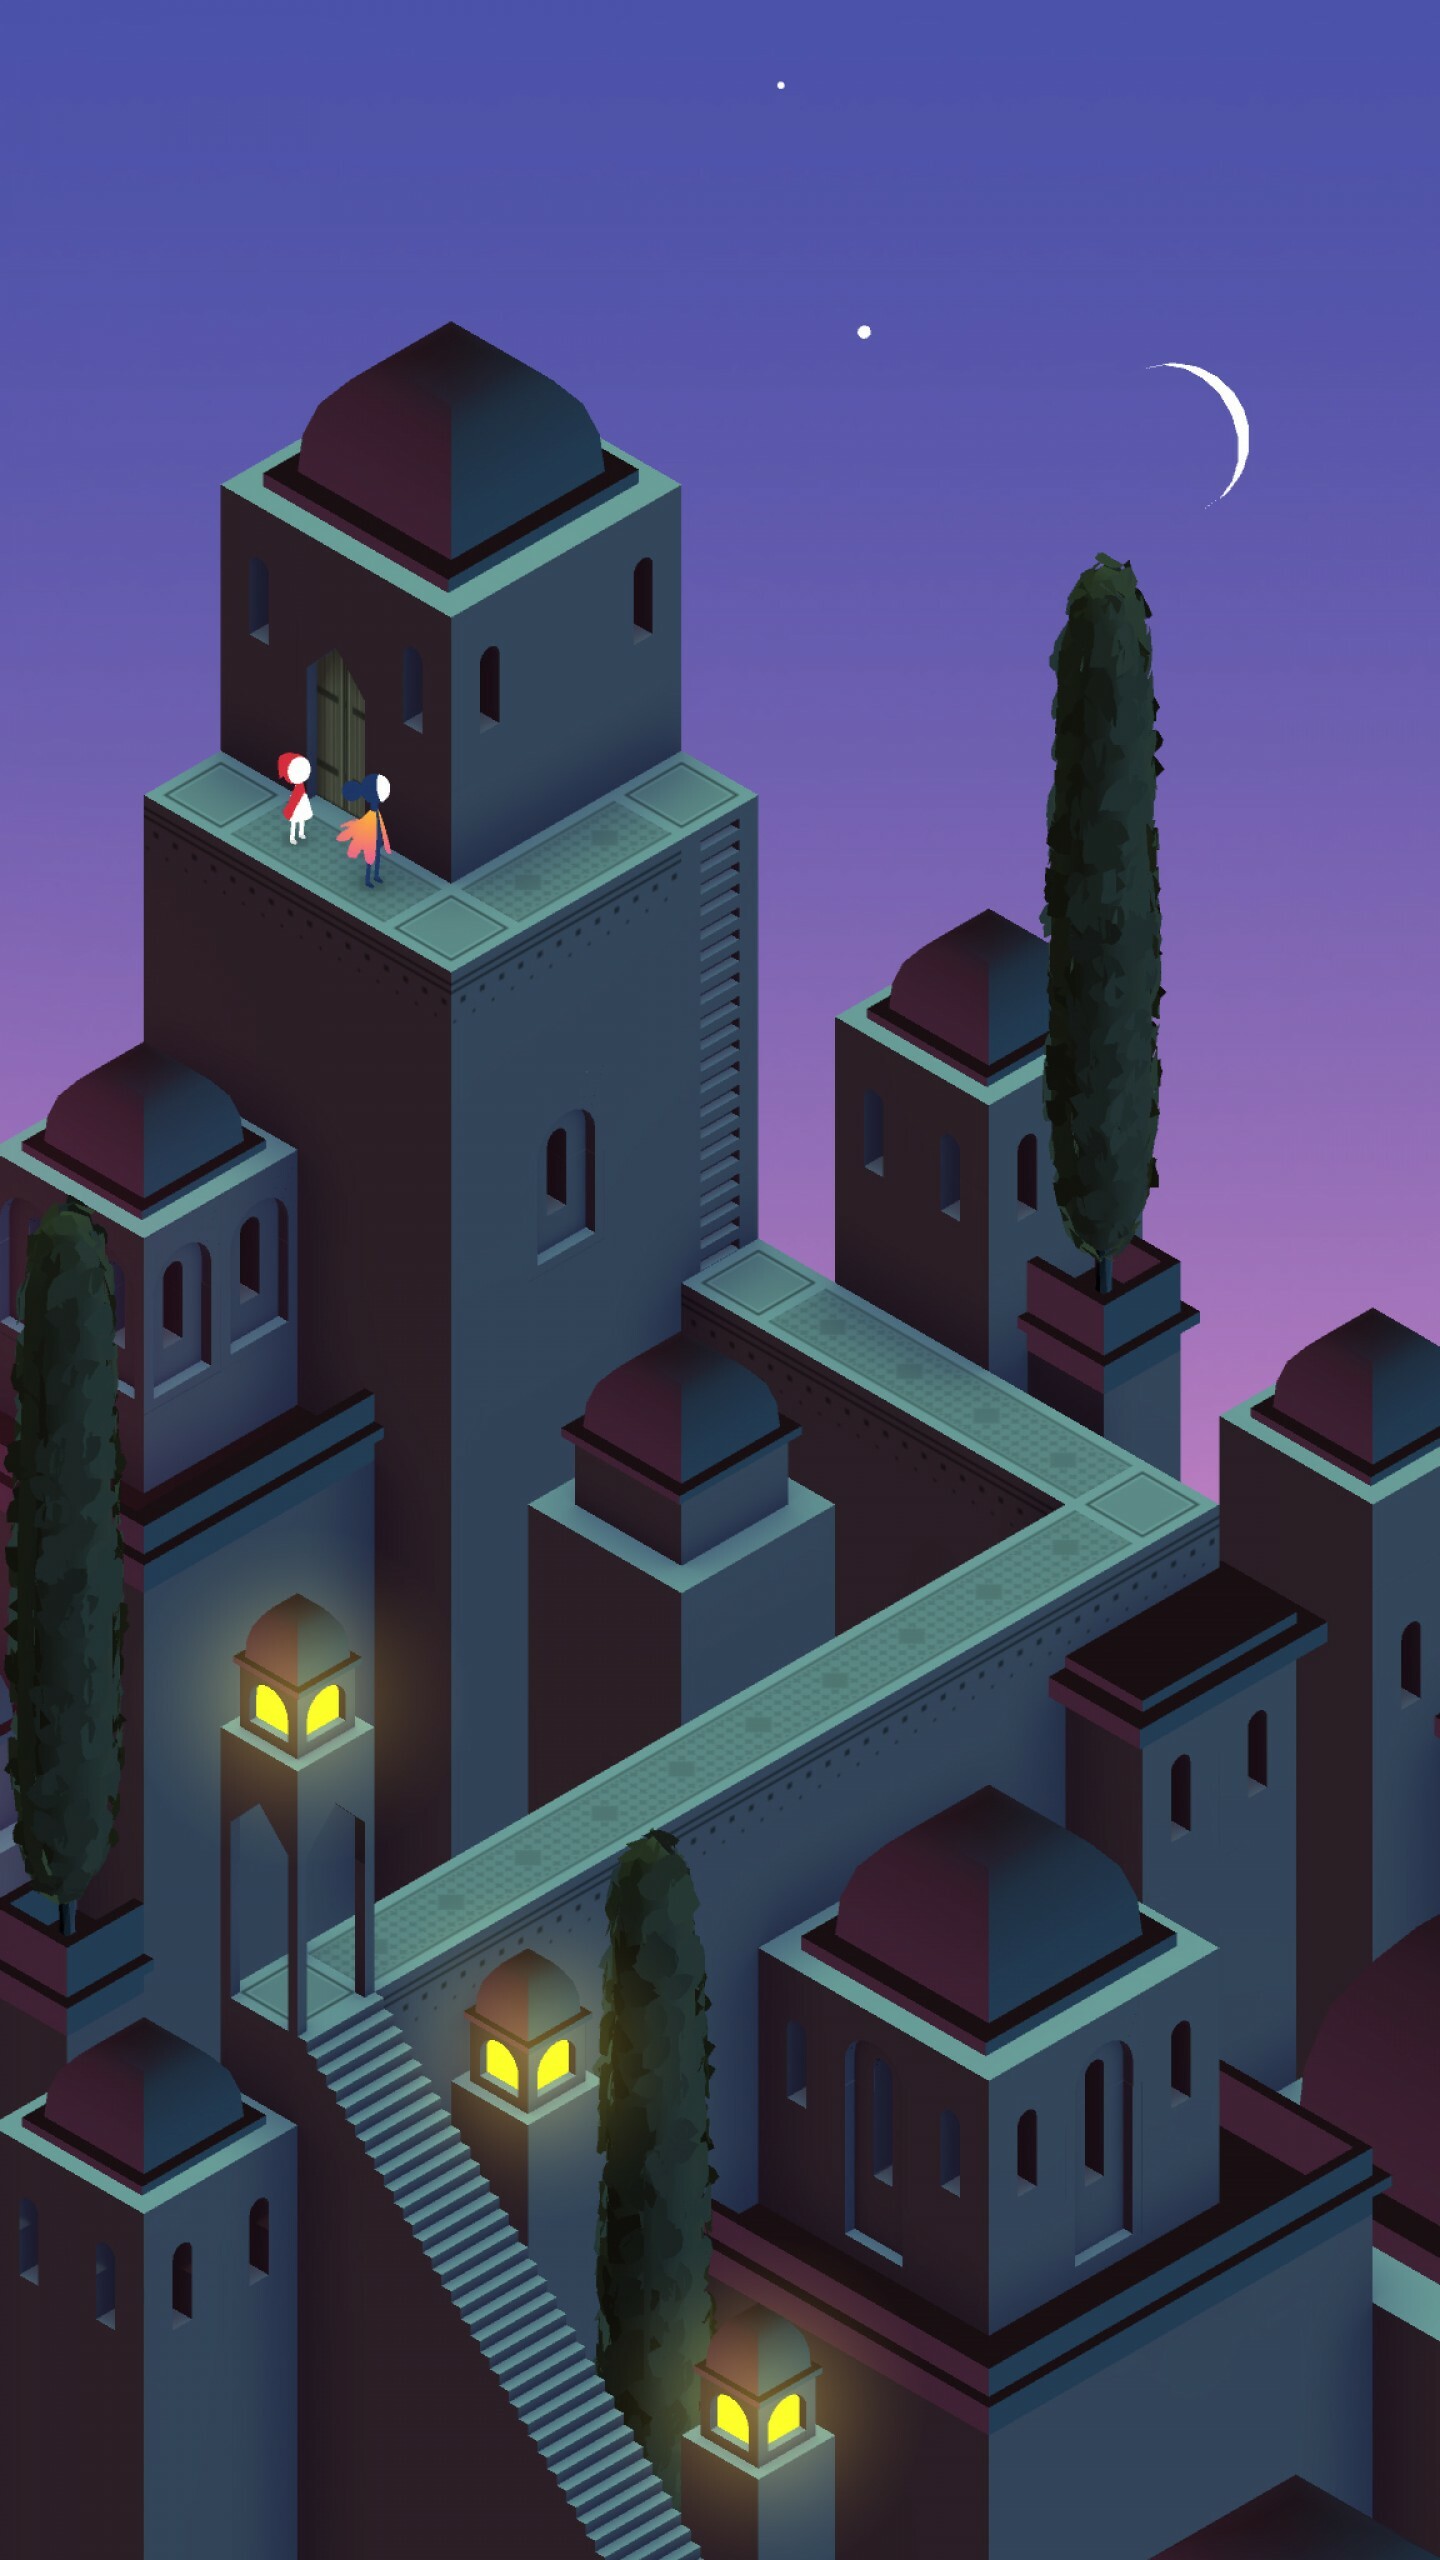 Monument Valley: After a closed beta test, it was released for iOS on April 3, 2014, and was later ported to Android and Windows Phone, Puzzle game. 1440x2560 HD Background.